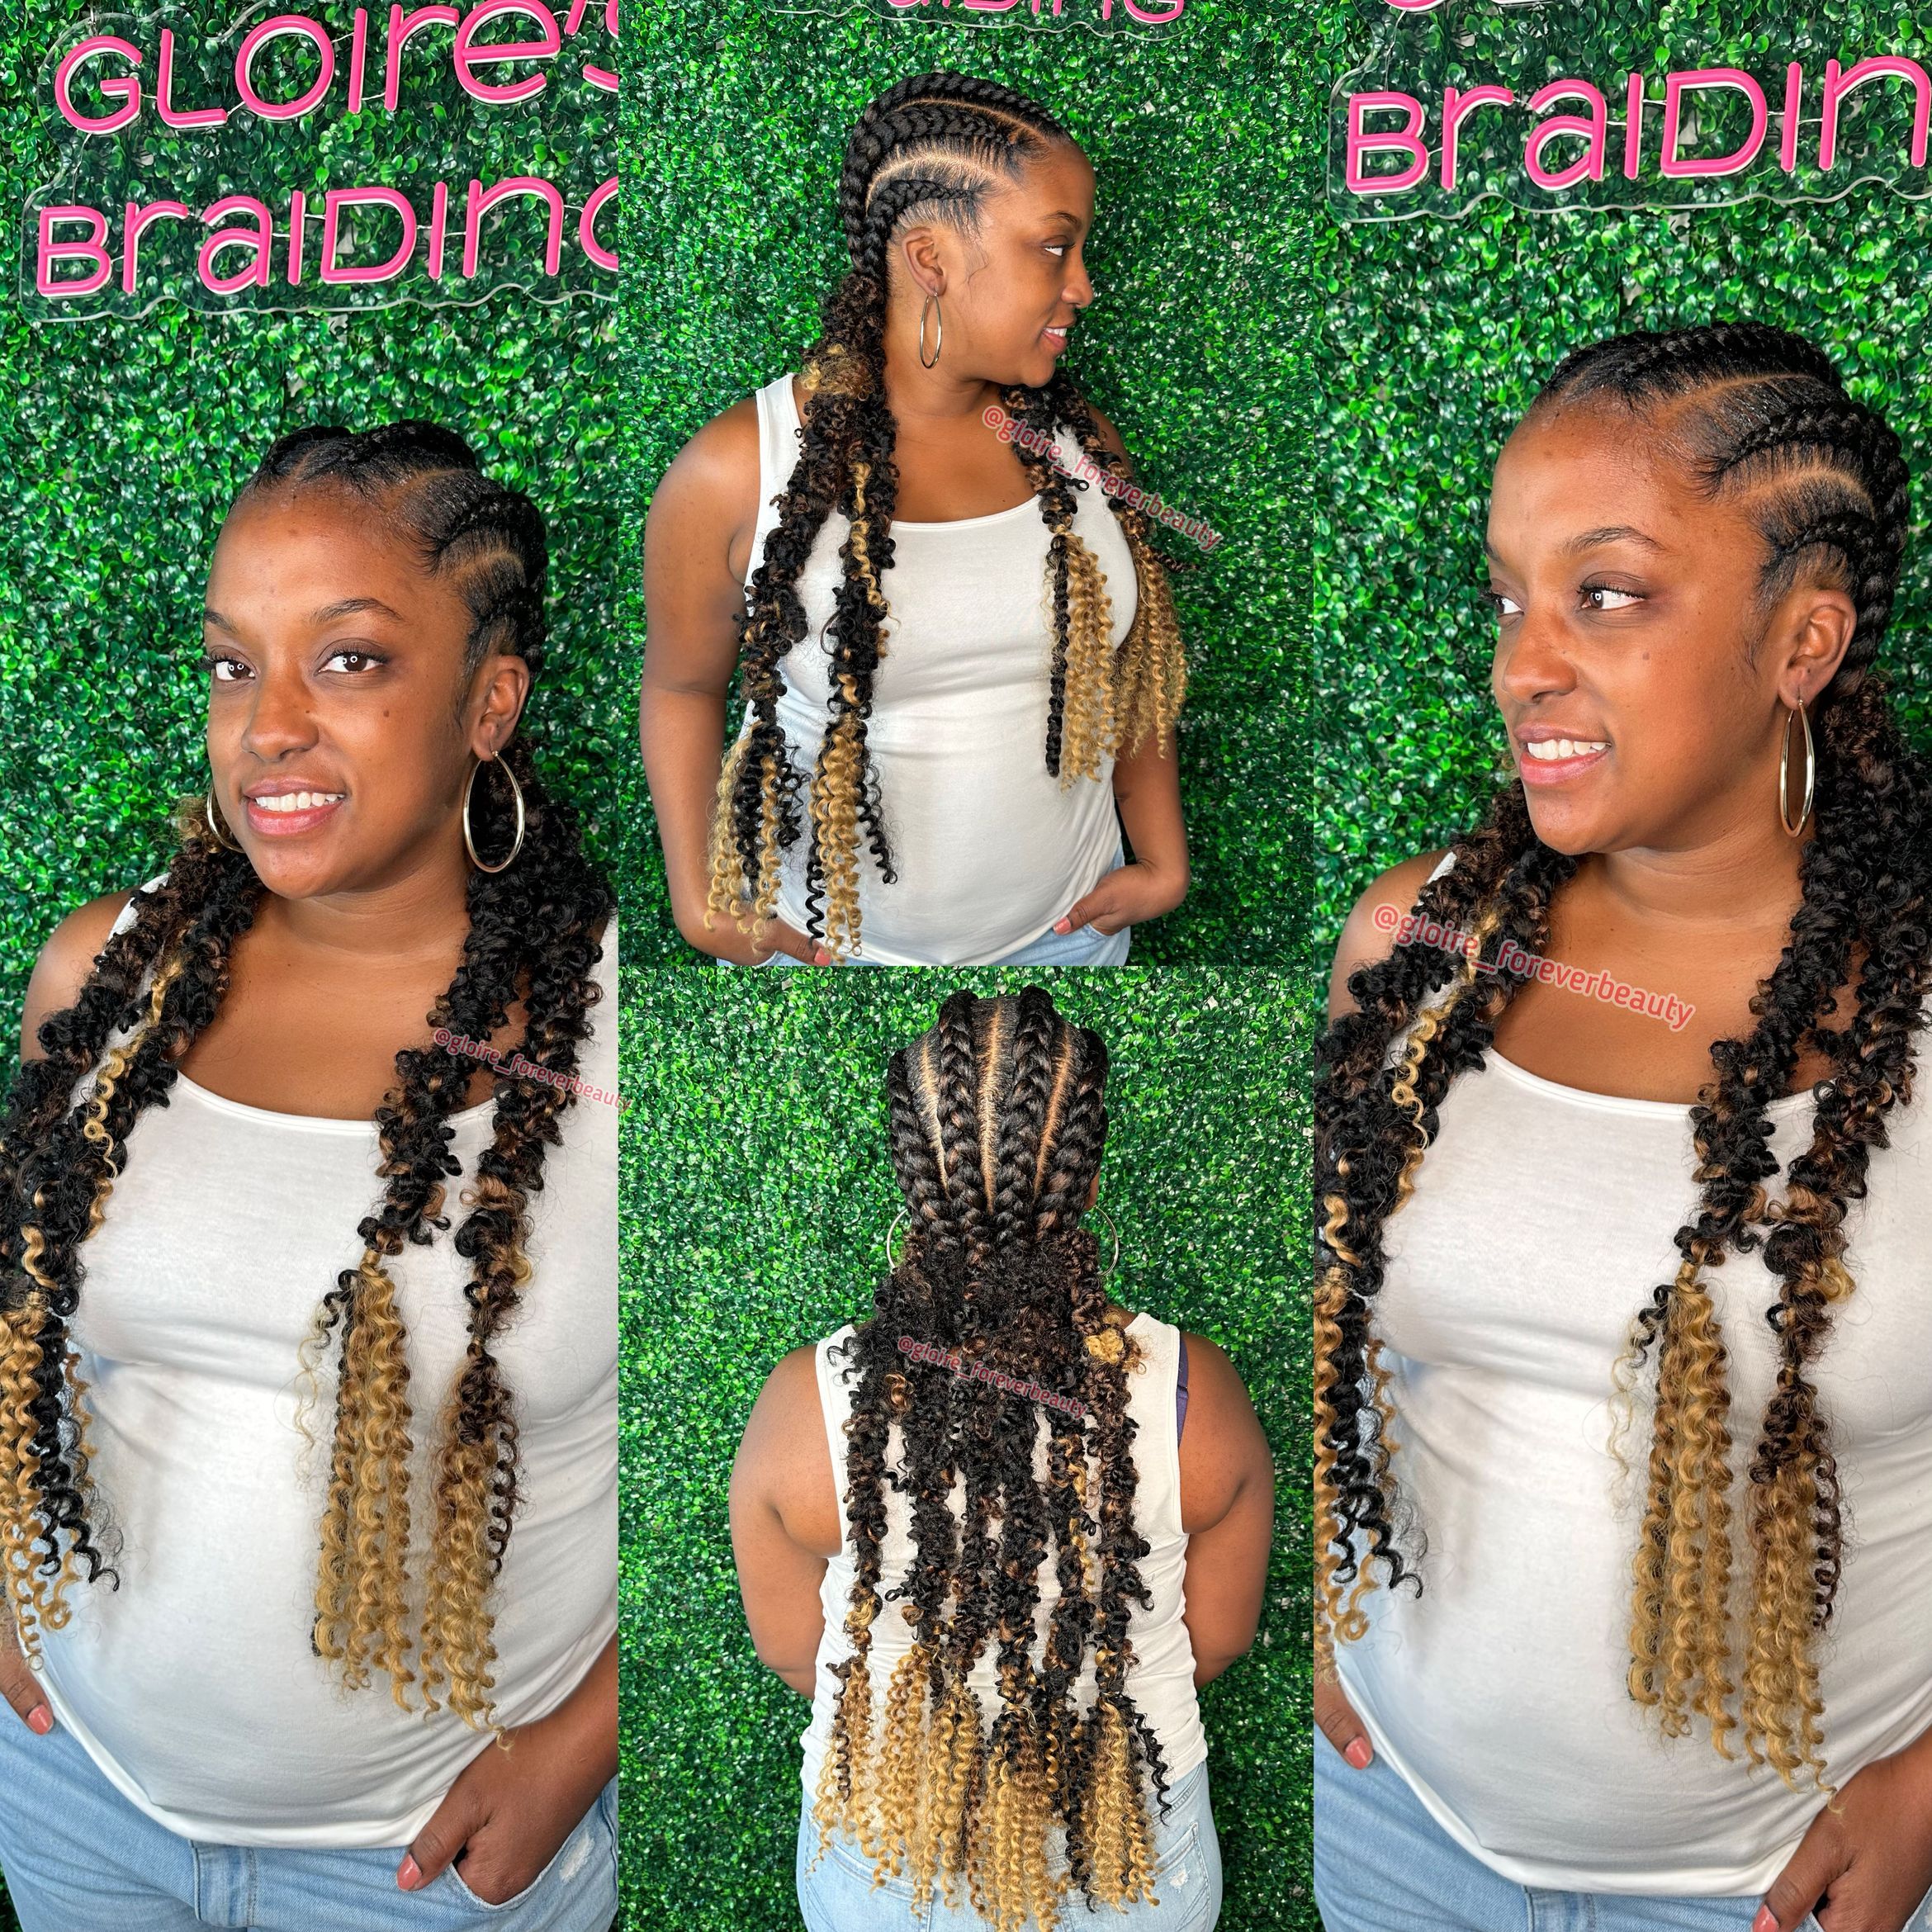 FEED INS 6 Braids curly ends loose sexy portfolio